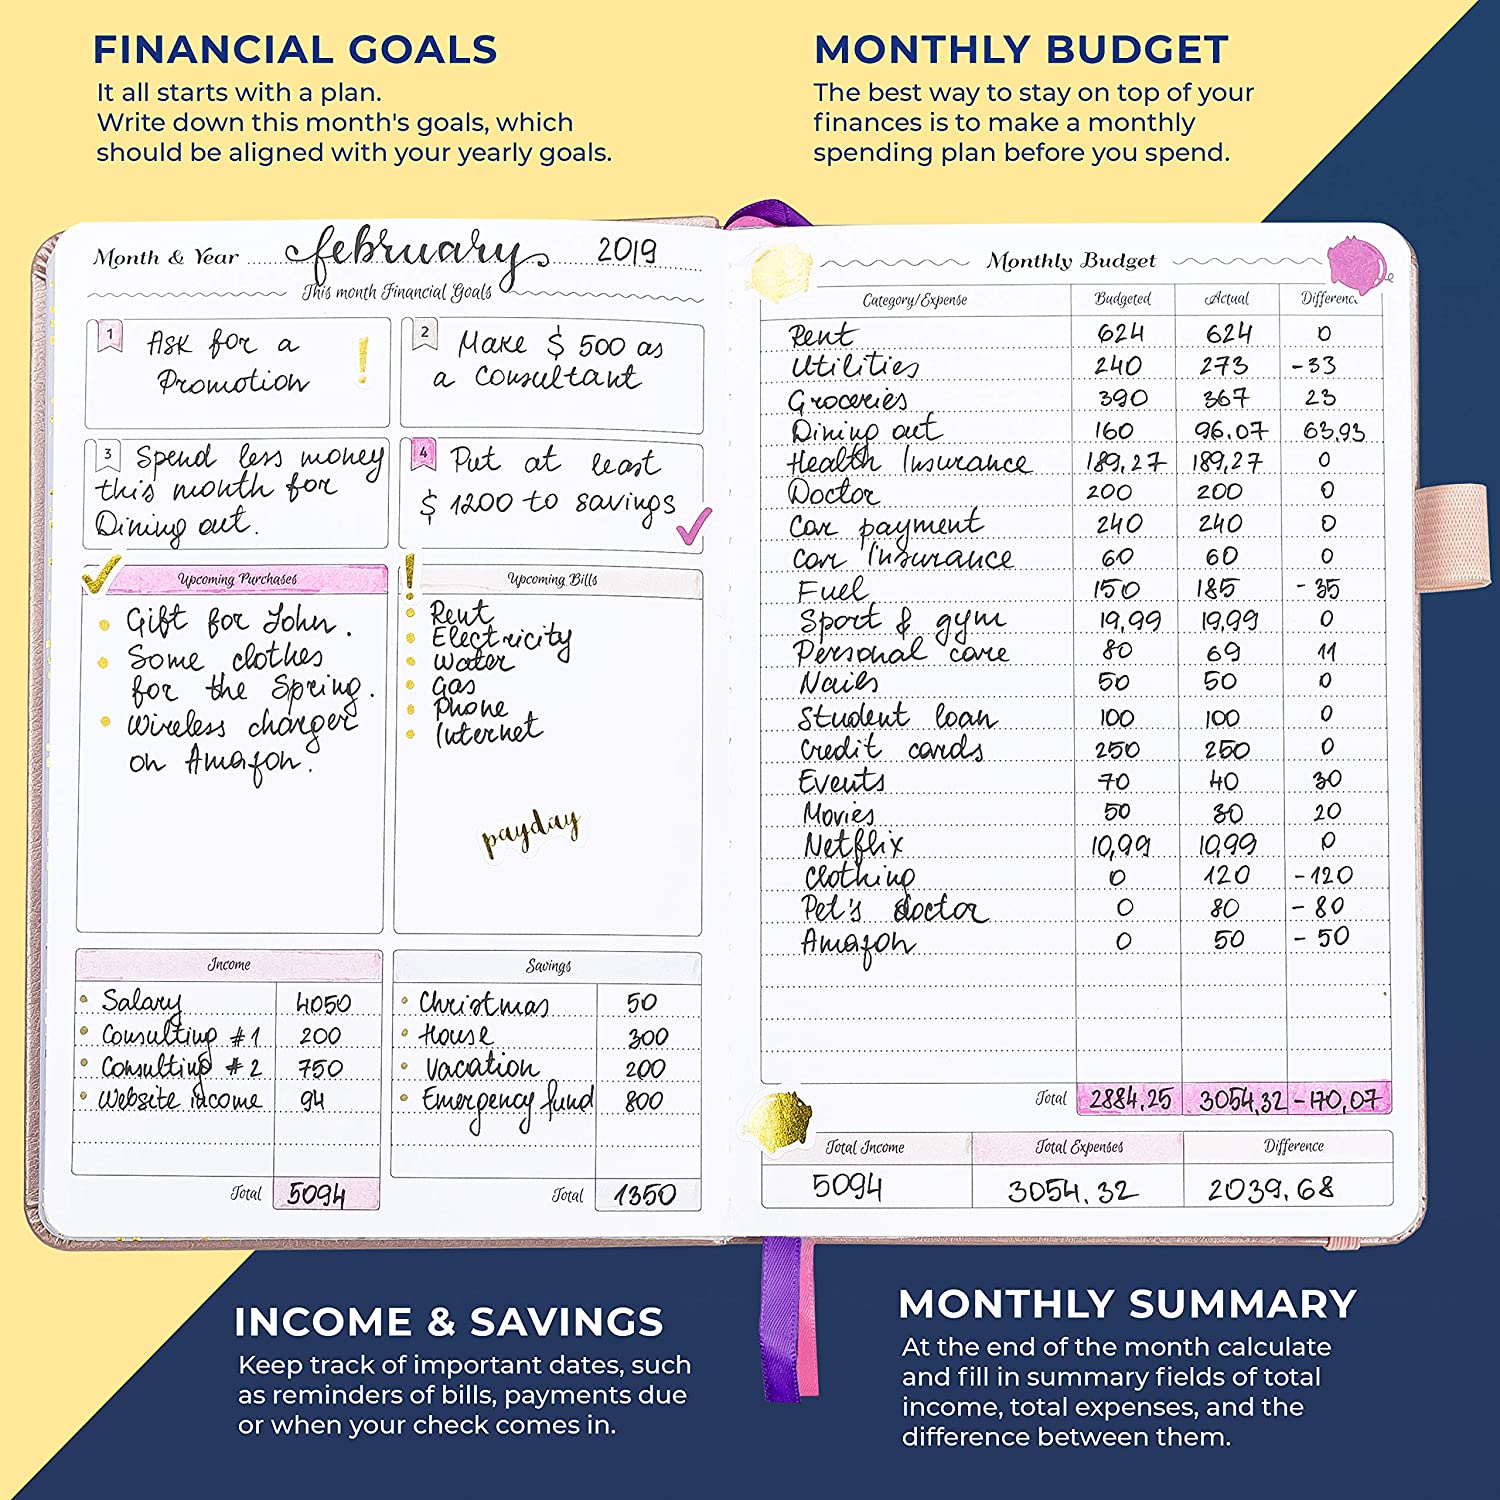 GoGirl Budget Planner – Monthly Financial Planner Organizer Budget Book - e4cents